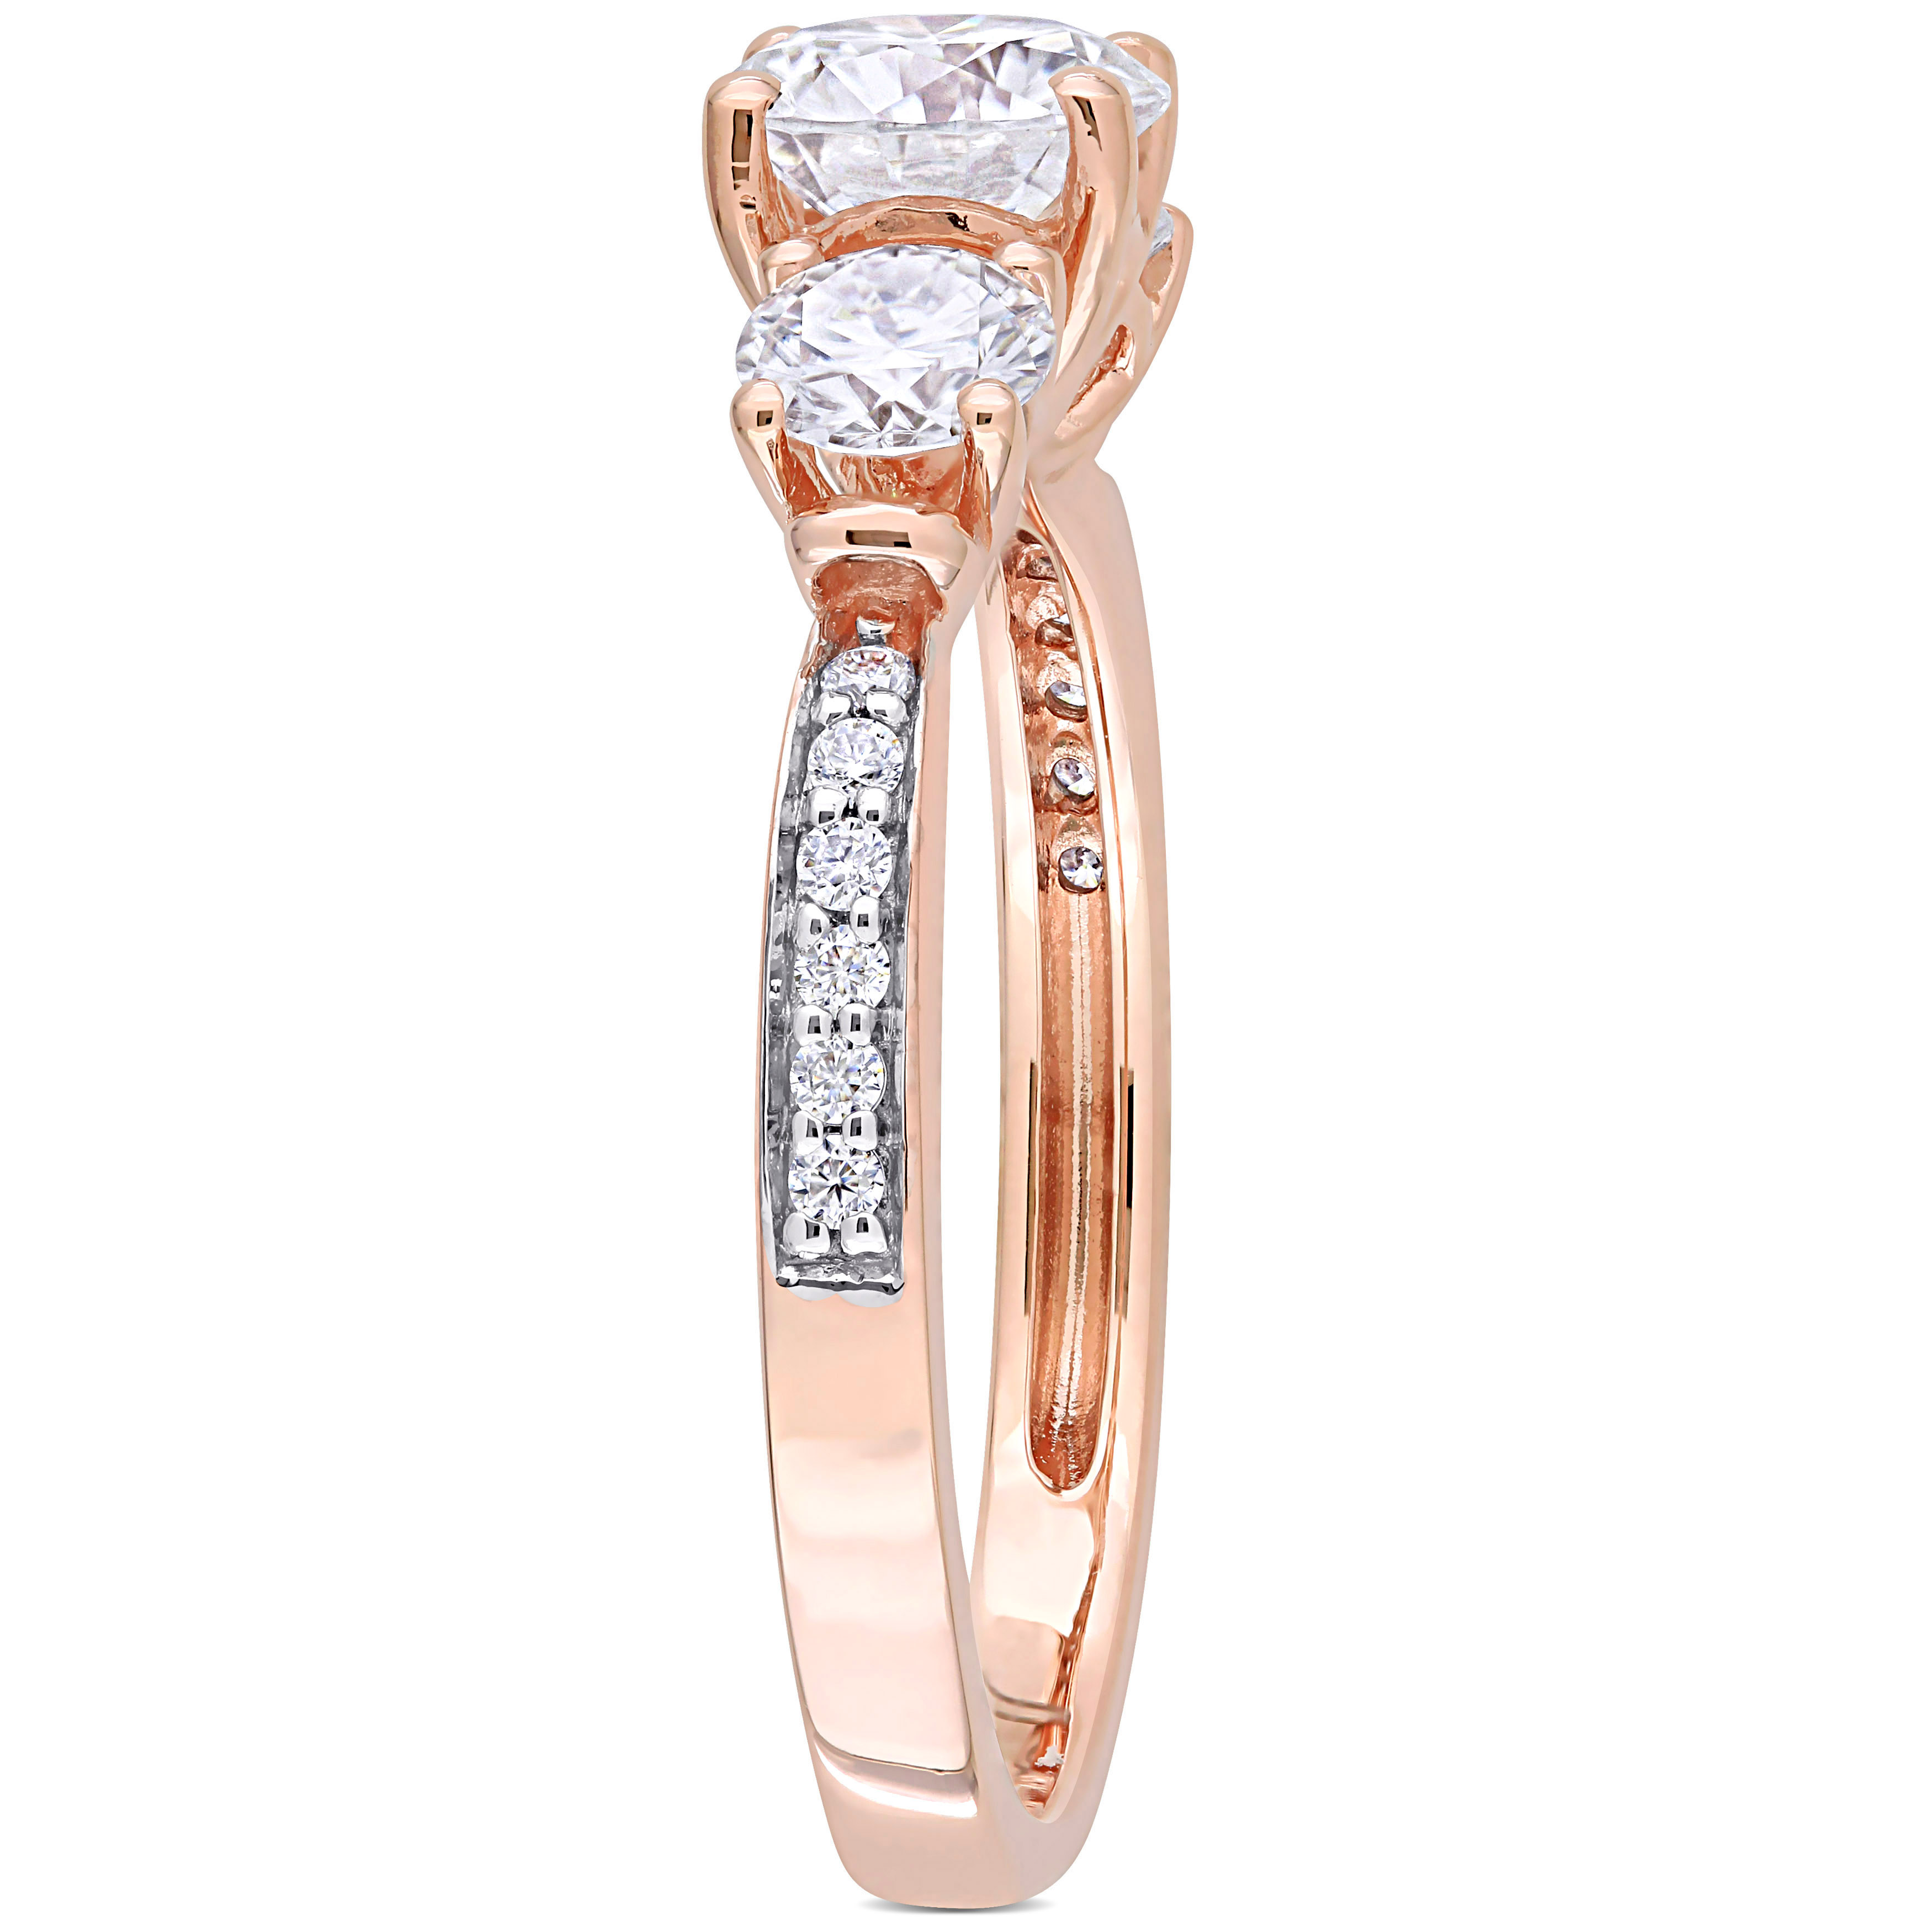 1 3/8 CT DEW Created Moissanite 3-Stone Engagement Ring in 10k Rose Gold